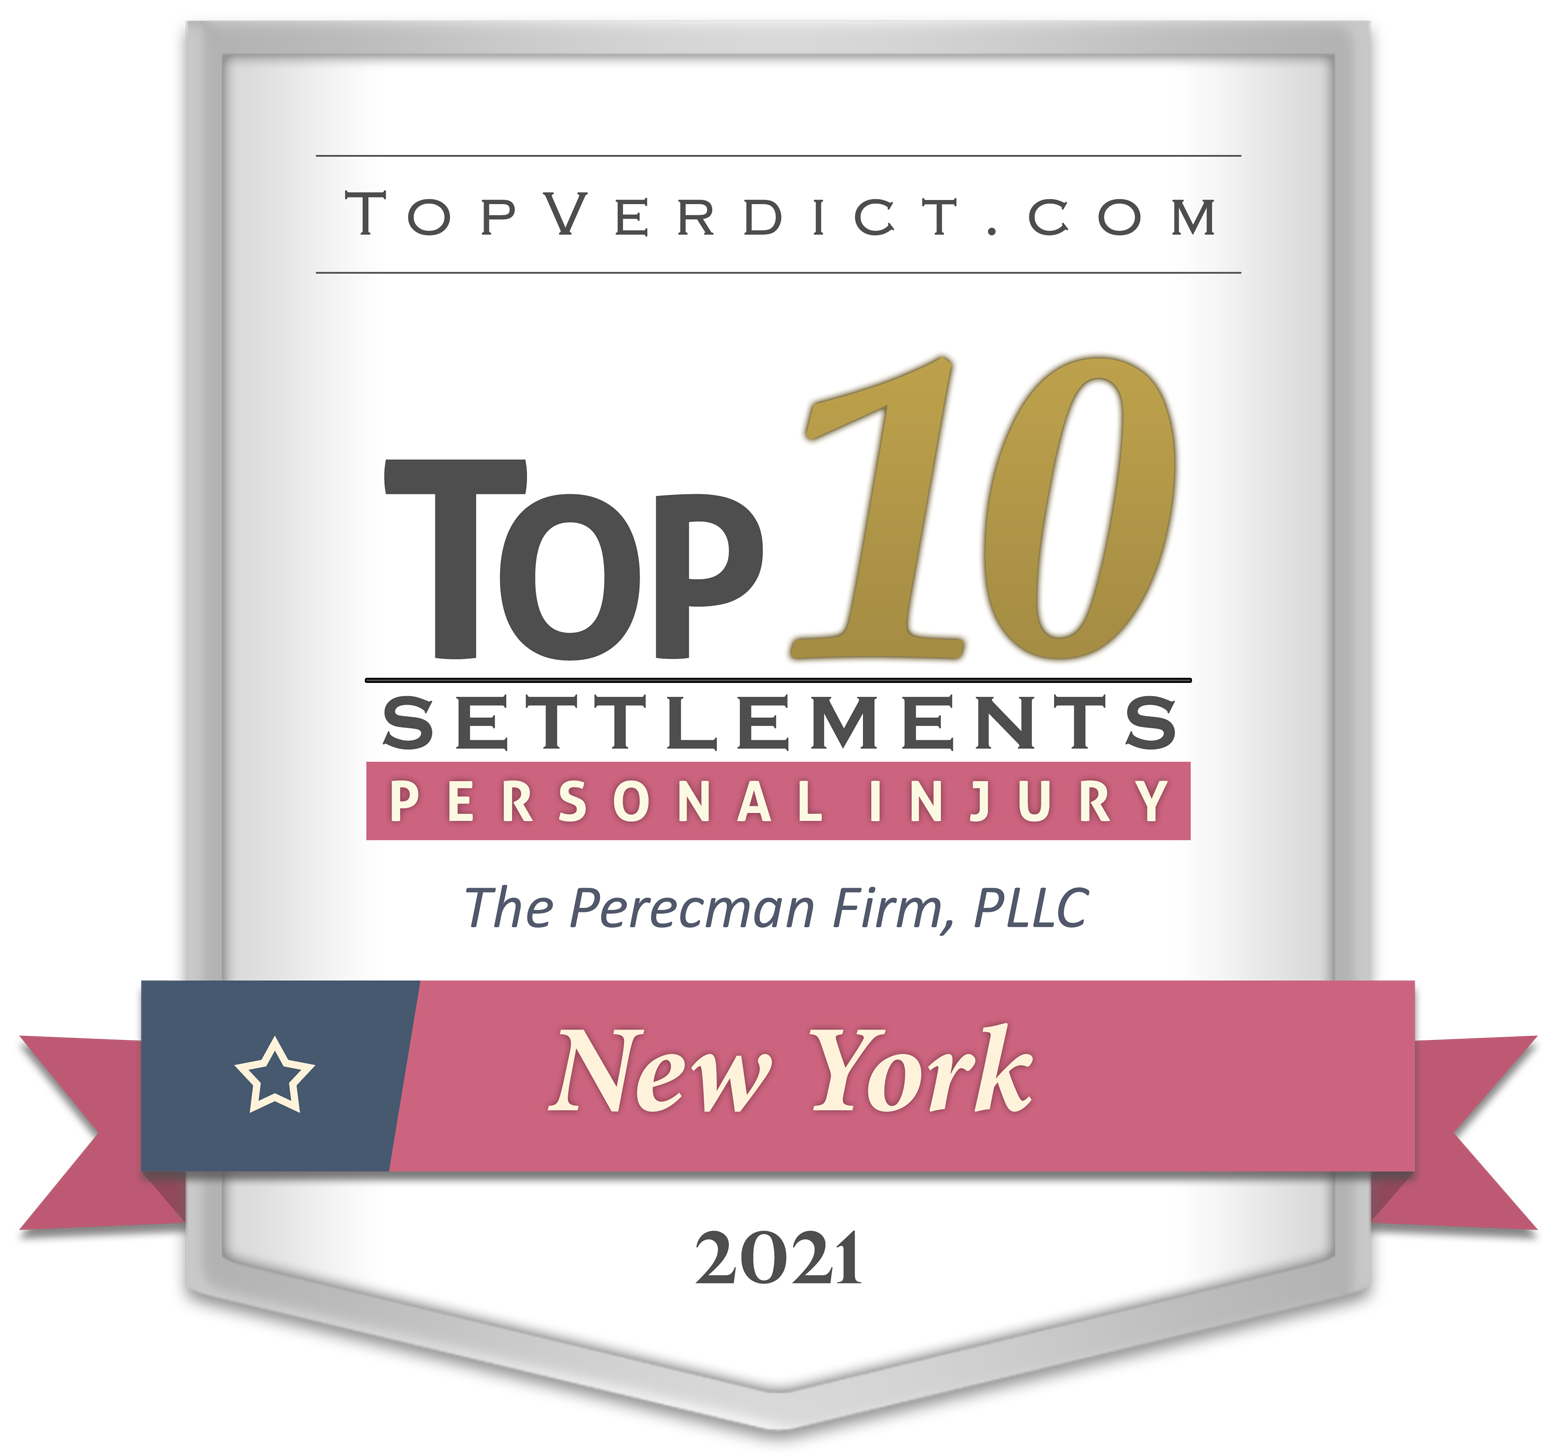 Top 10 personal injury settlements